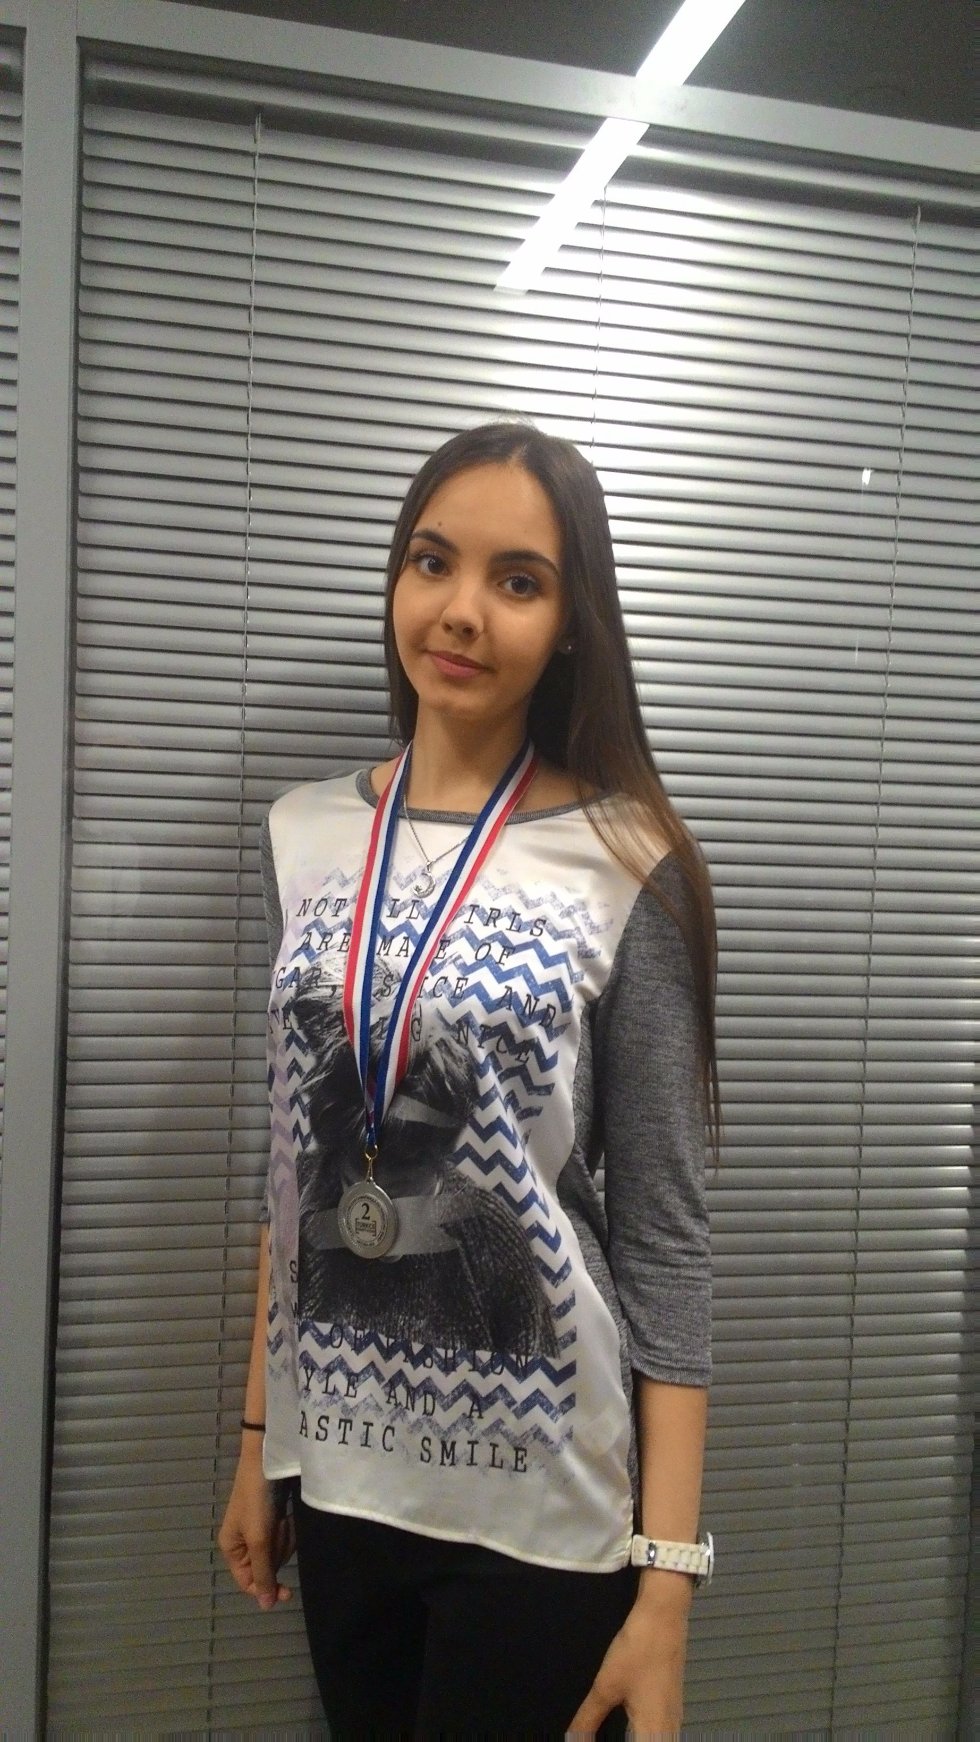 A student of Institute of Philology and Intercultural Communication has won the All-Russian Turkish Language Olympiad ,A student of Institute of Philology and Intercultural Communication has won the All-Russian Turkish Language Olympiad